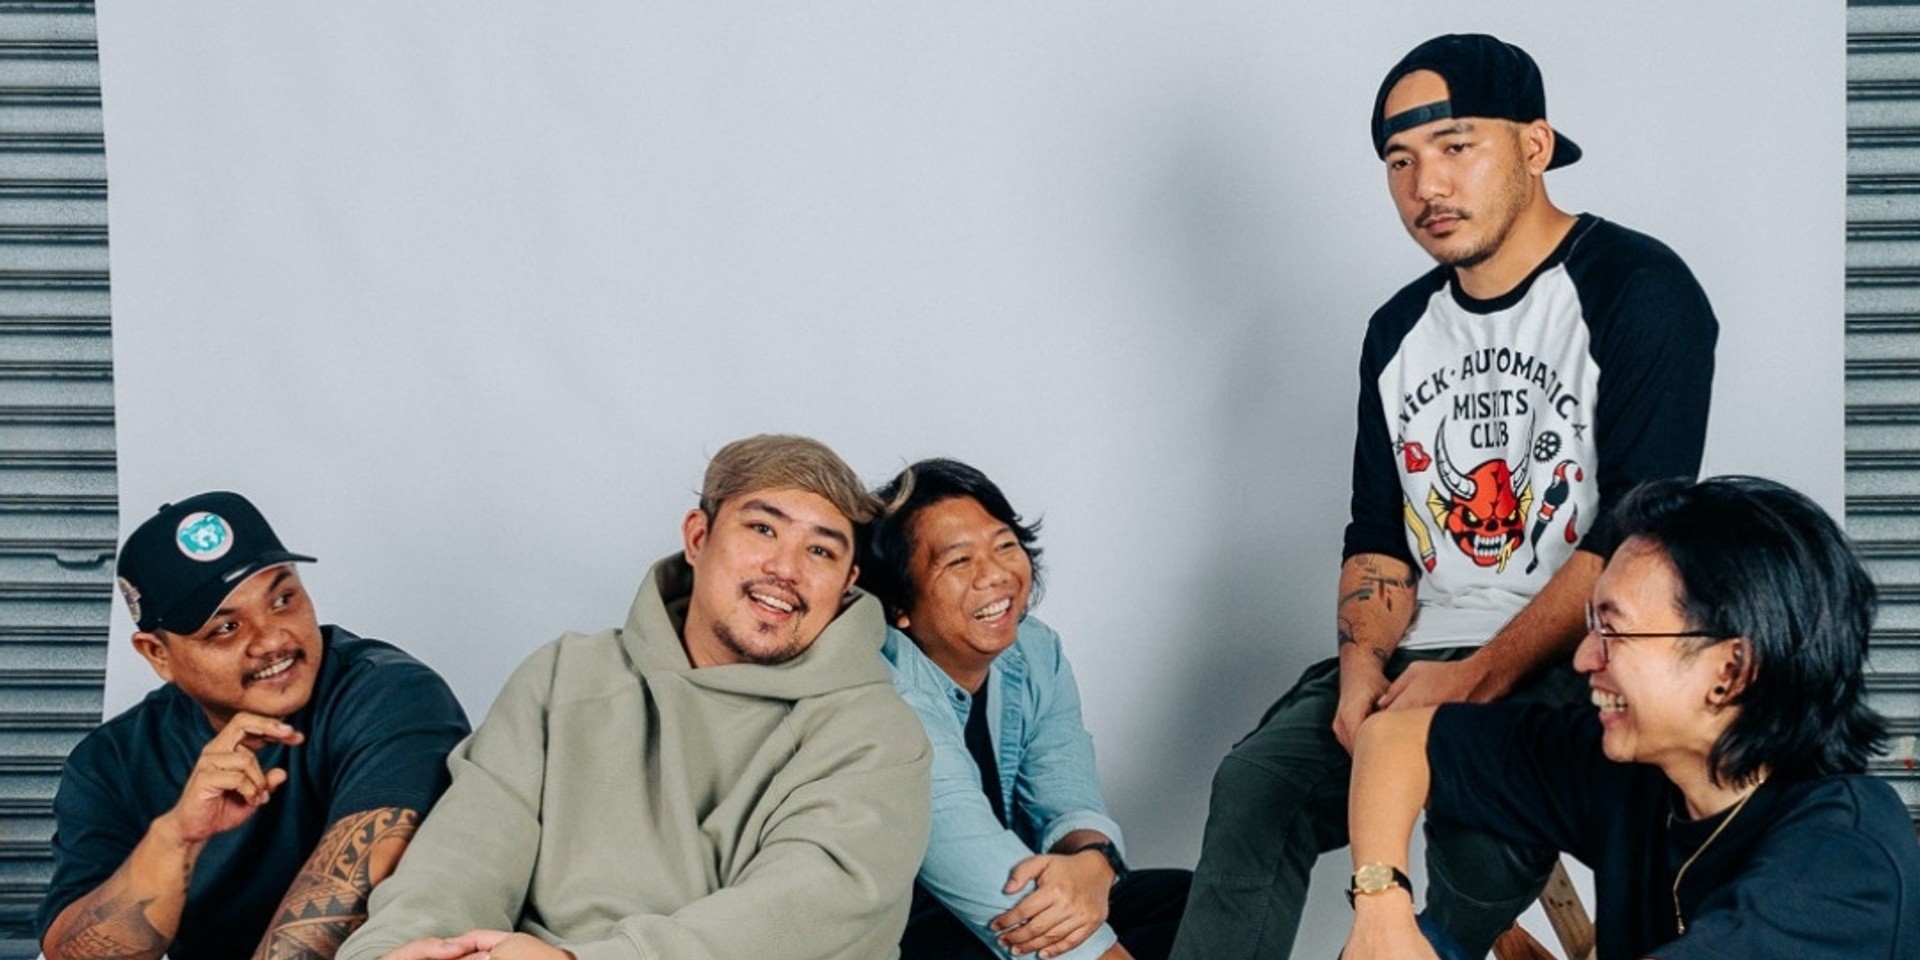 December Avenue's 'Langit Mong Bughaw' is now the most streamed Filipino album of all time on Spotify